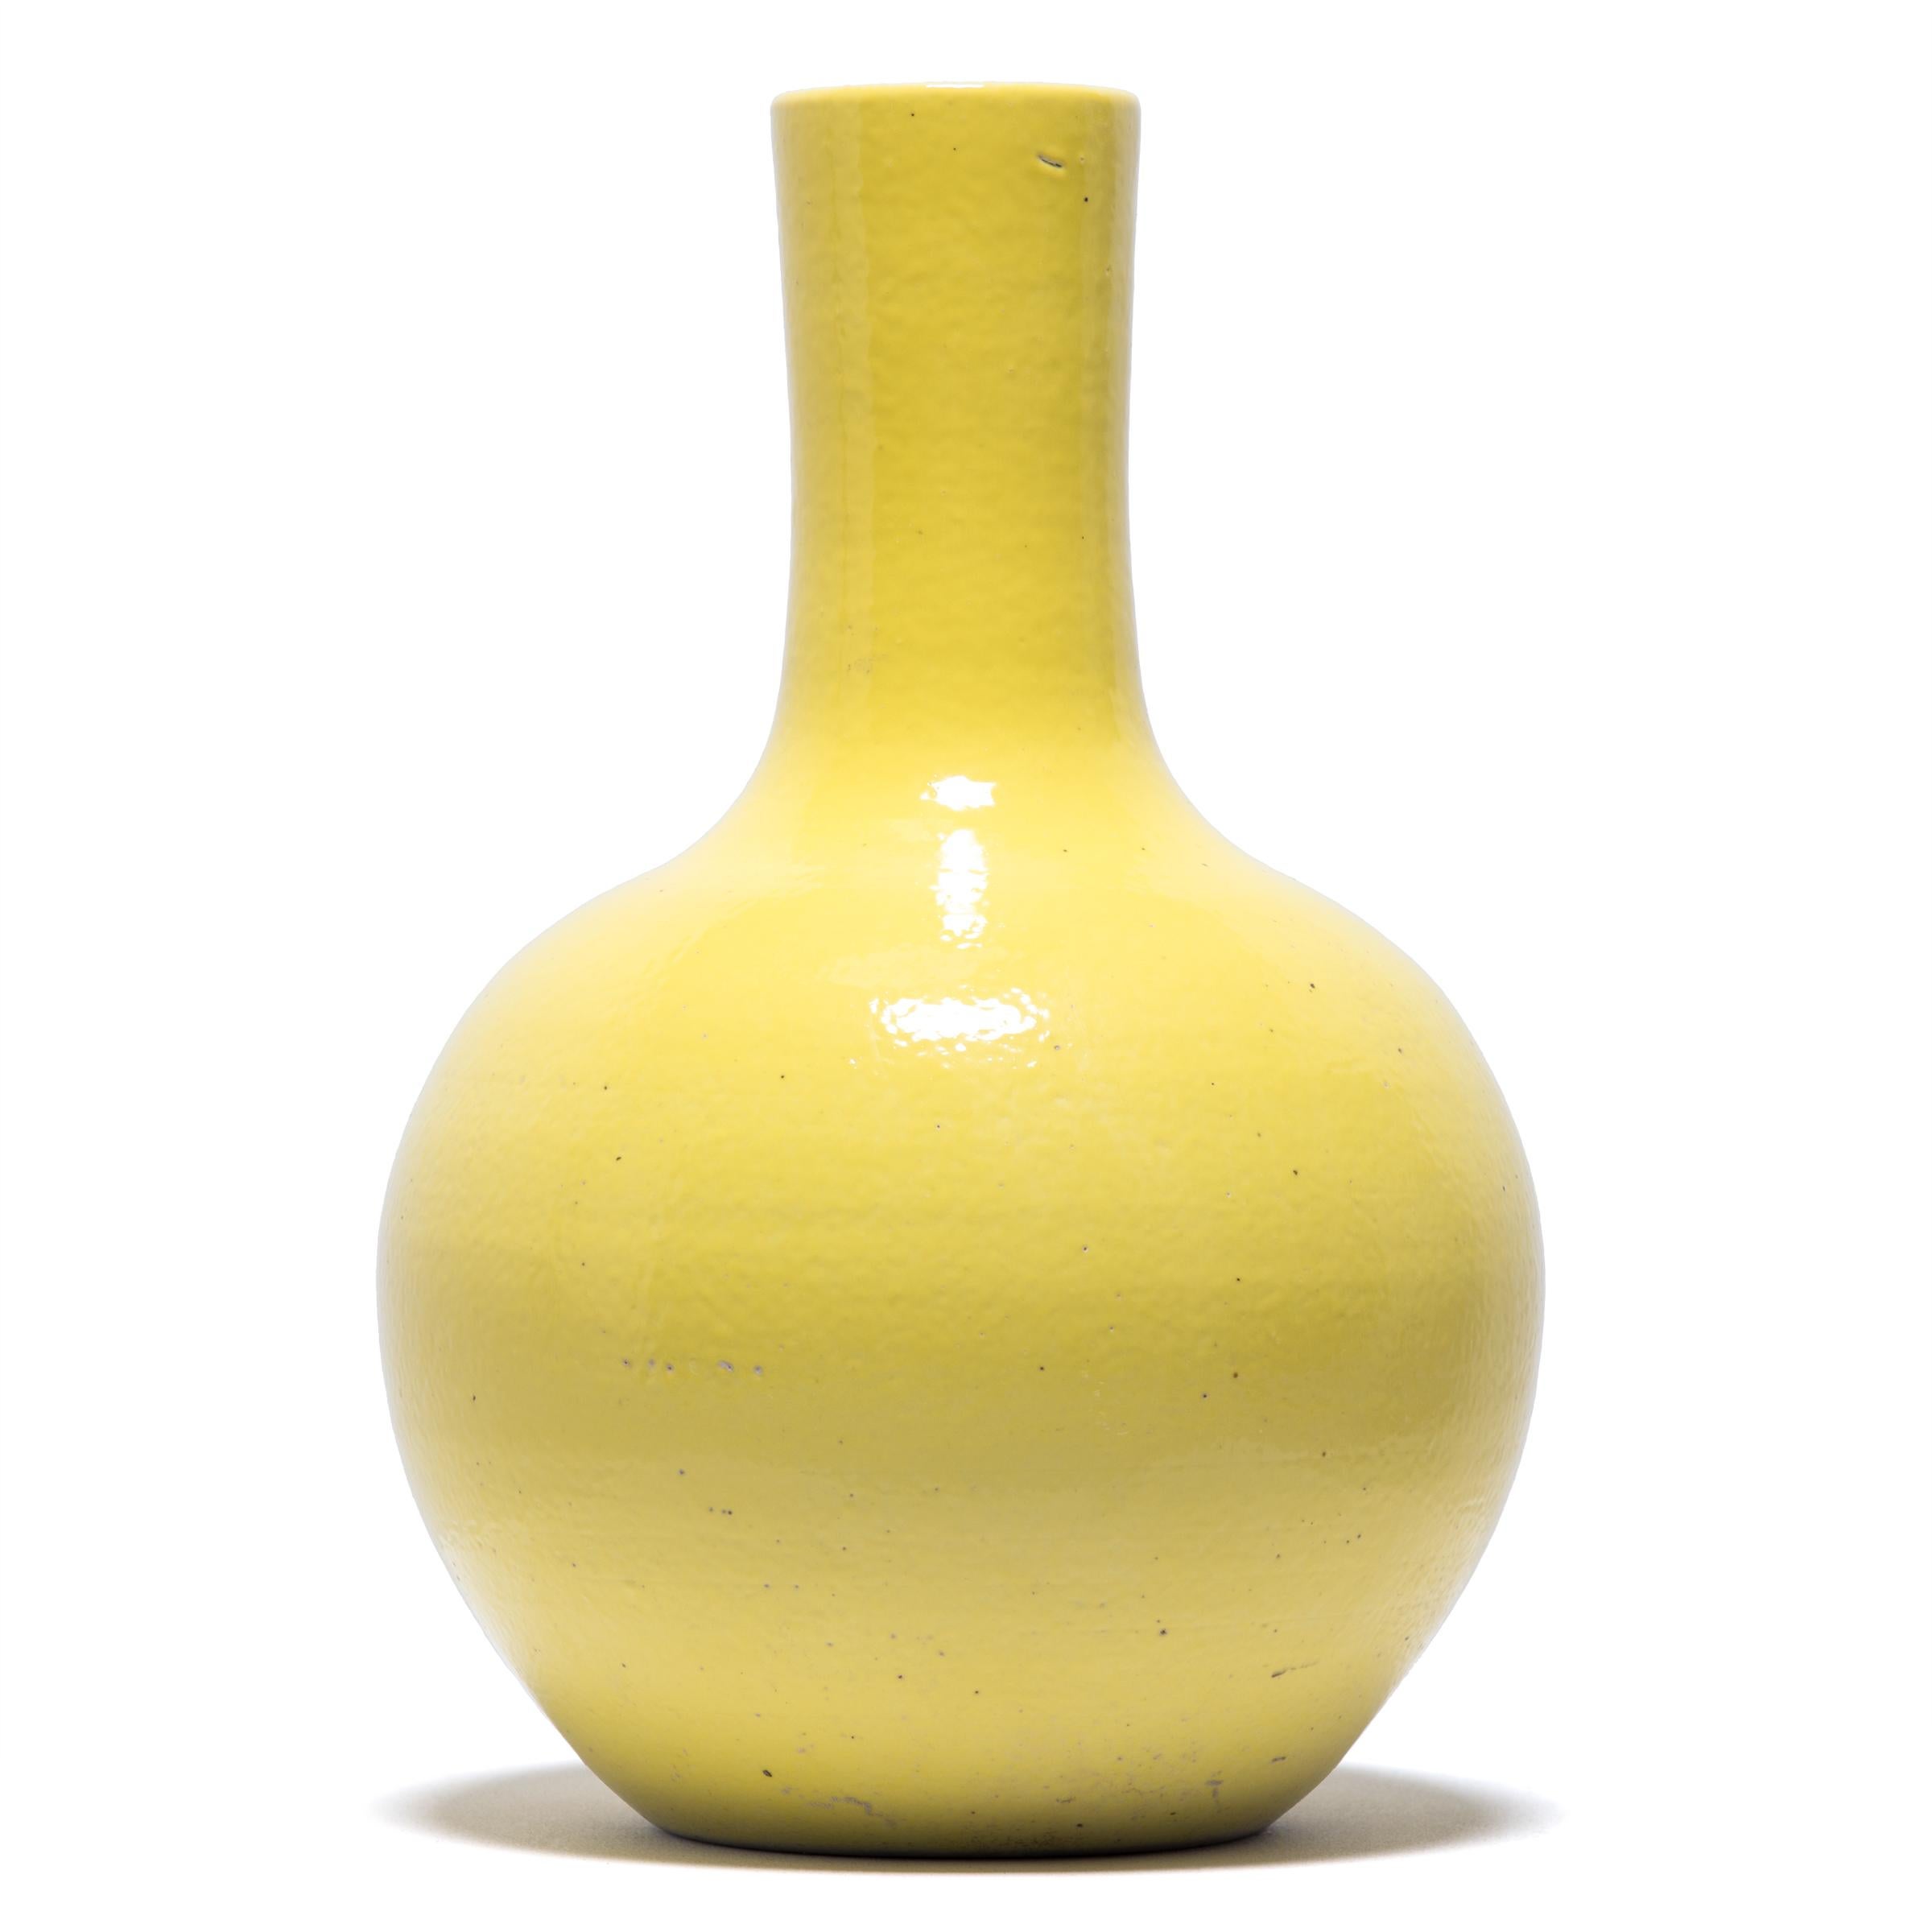 The striking monochrome of this vase draws on a long Chinese tradition of ceramics glazed in a single, statement-making color. The long, thin gooseneck design was sought after by 19th century European collectors who were buying these beautiful